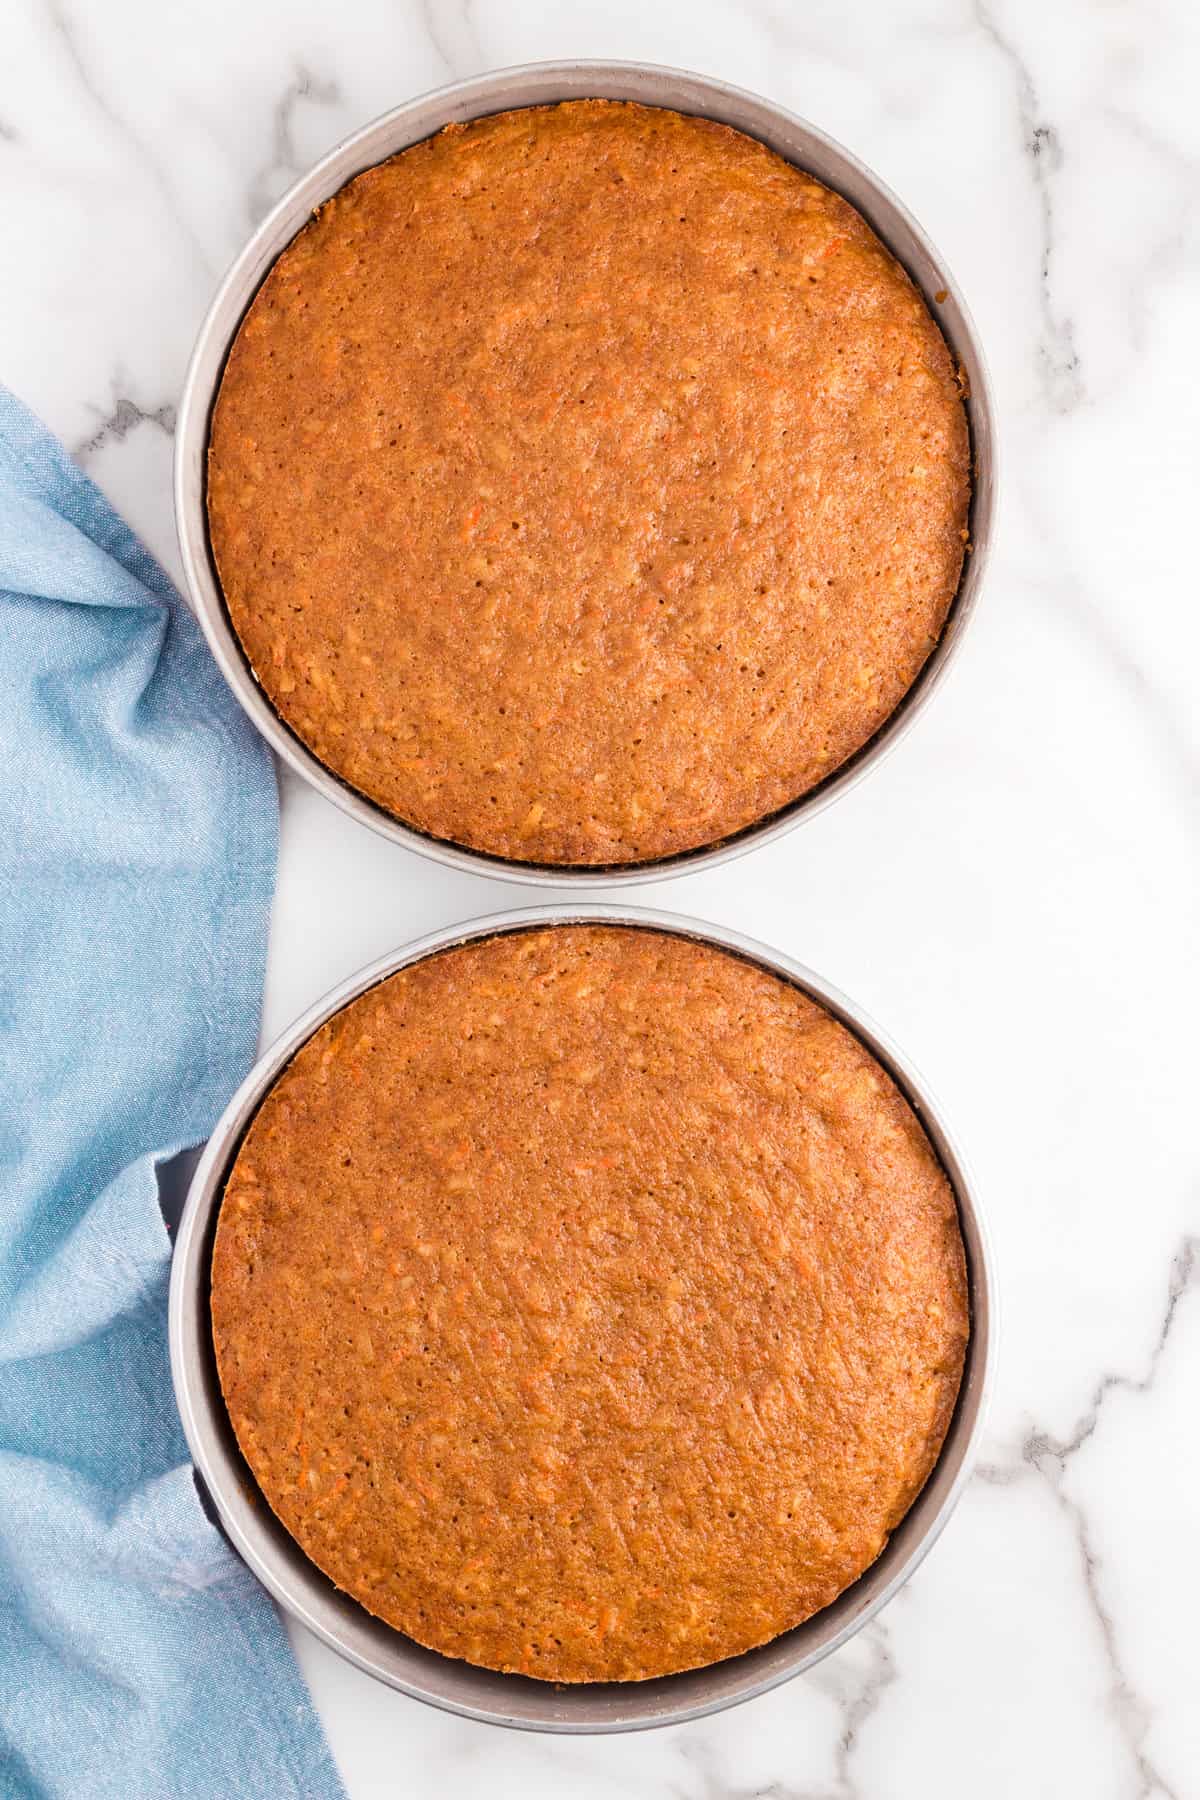 Carrot Cake baked to golden brown in two round cake pans